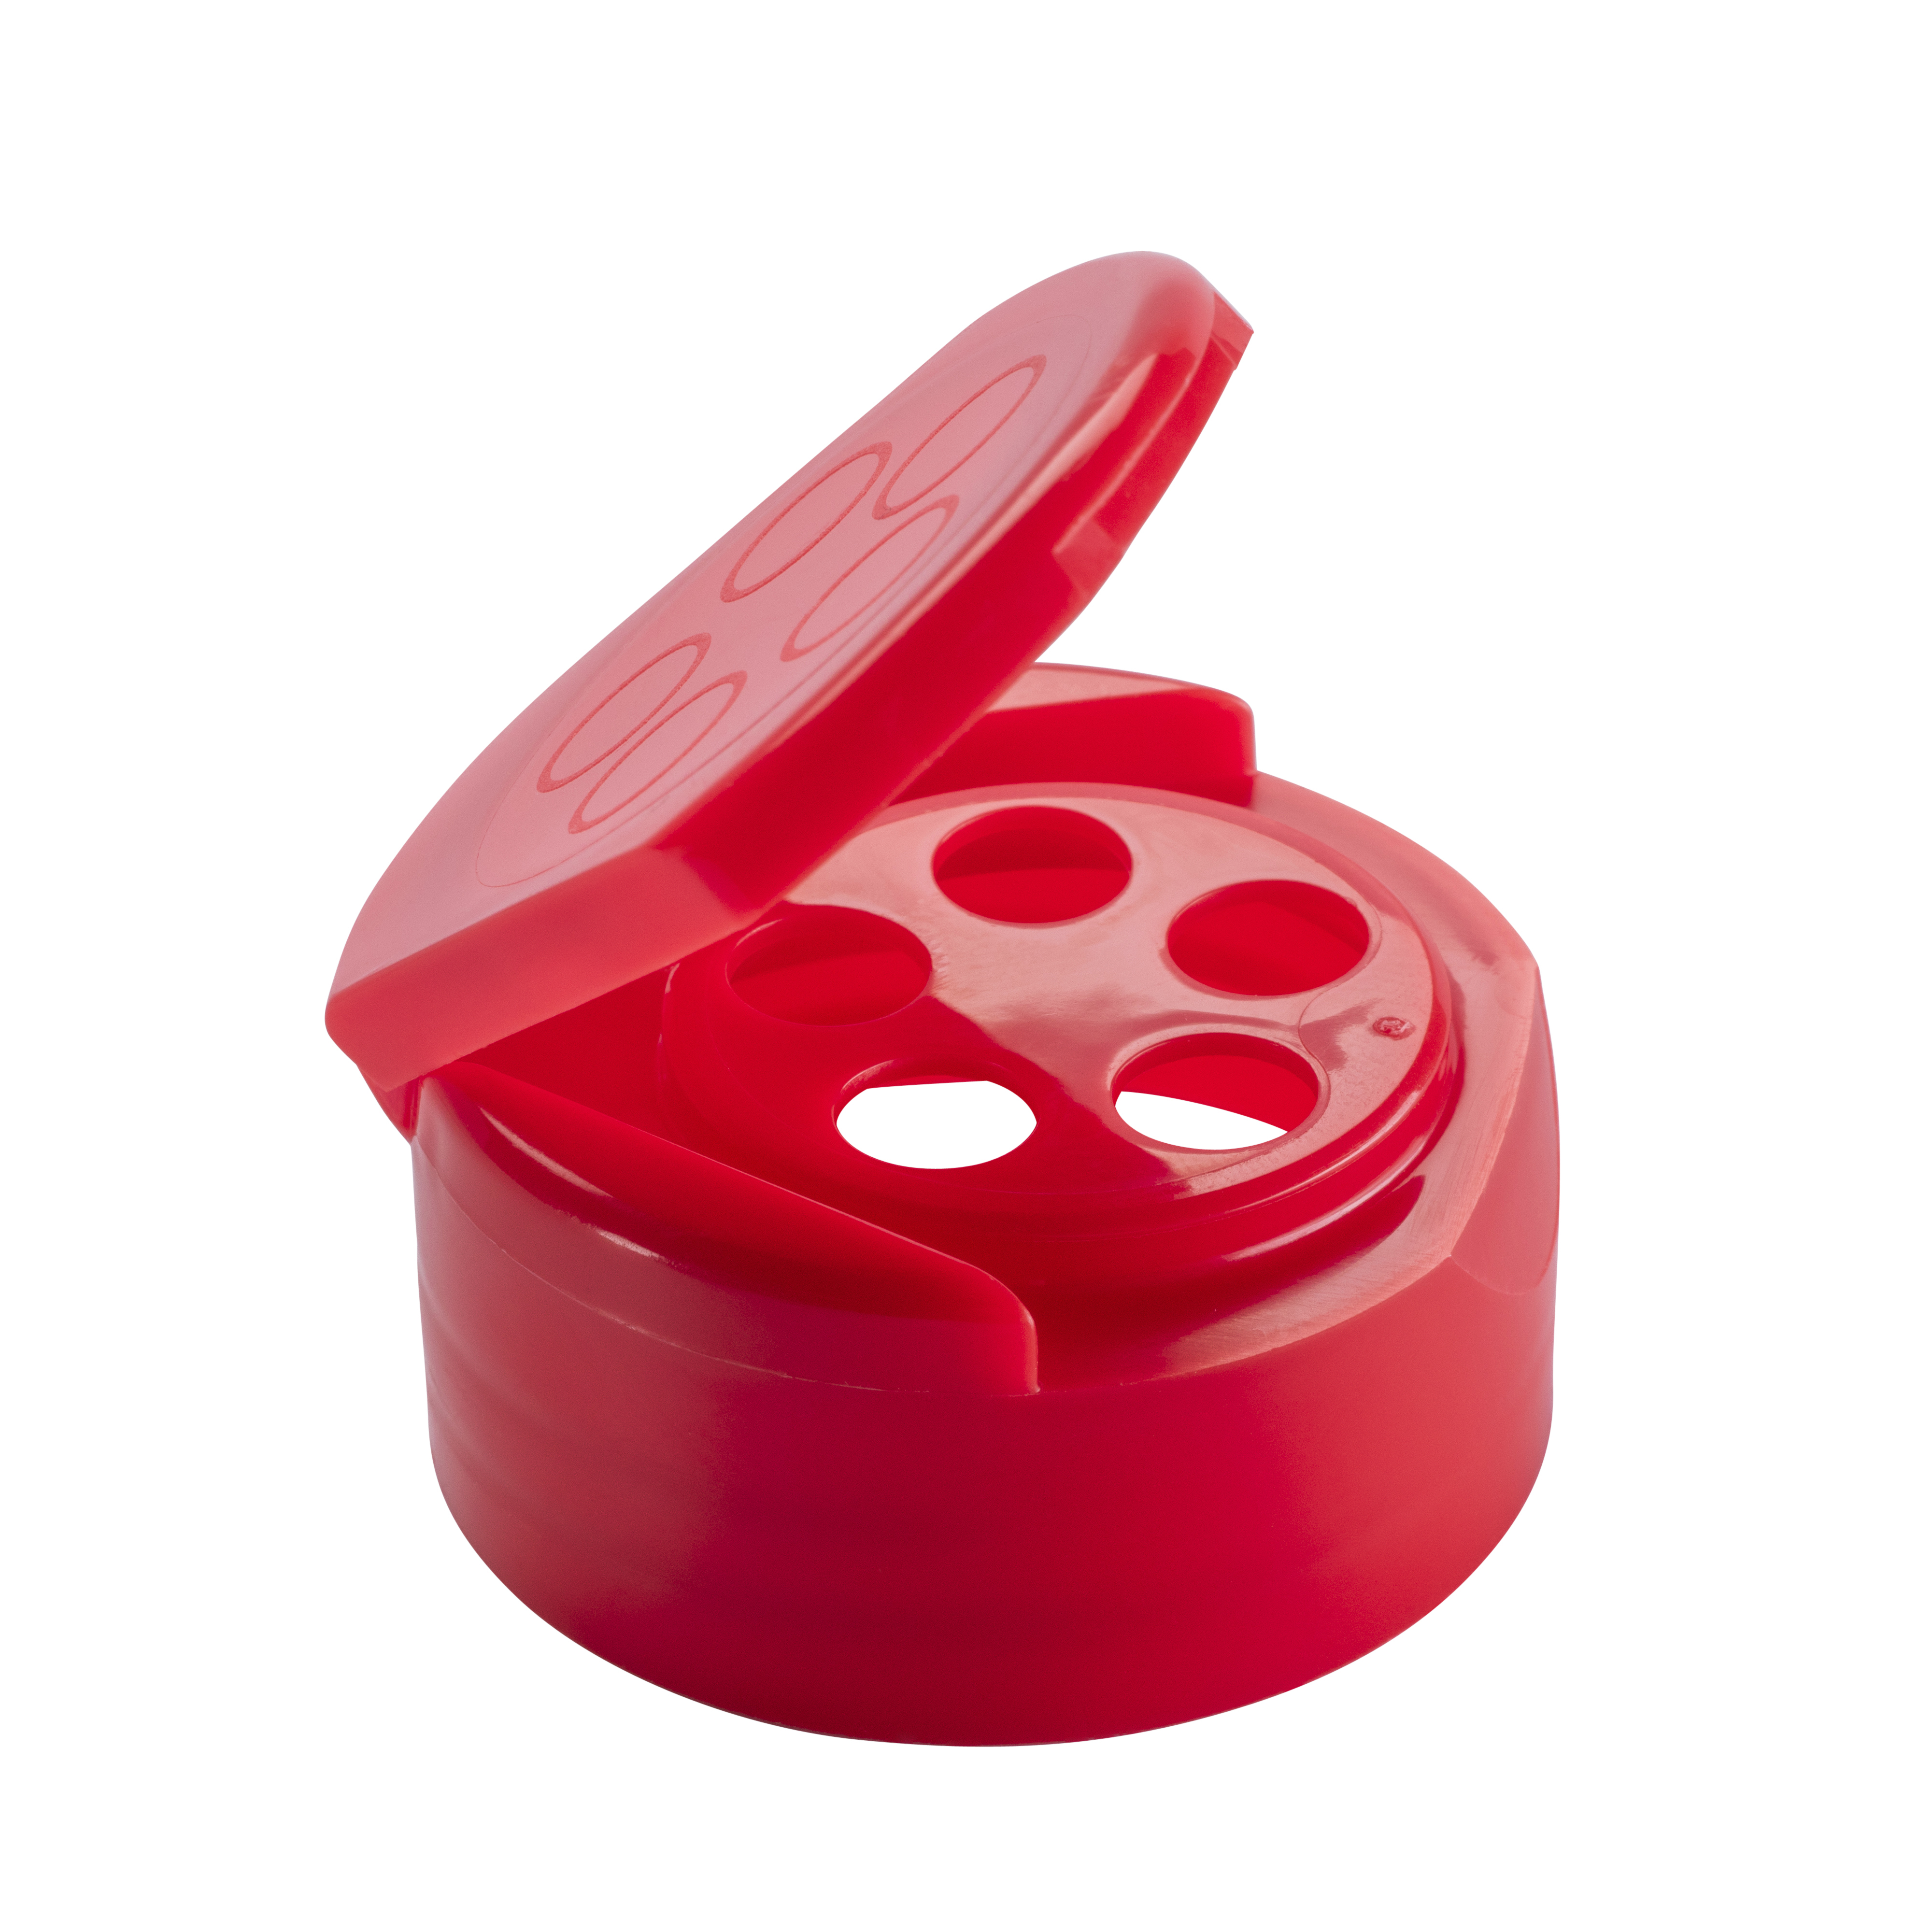 Red cap with pouring holes